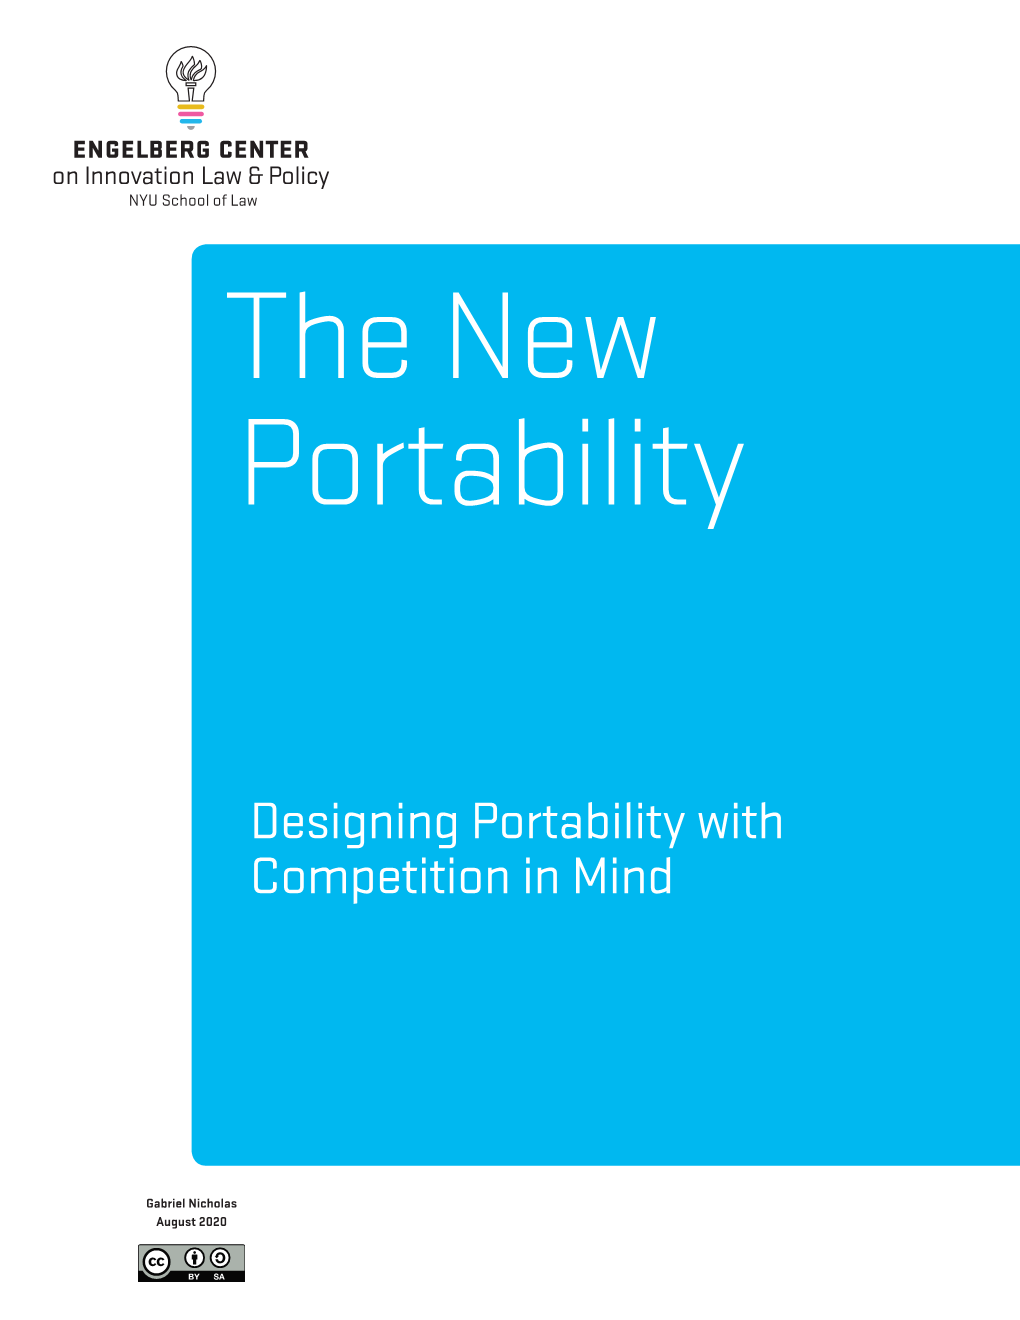 The New Portability